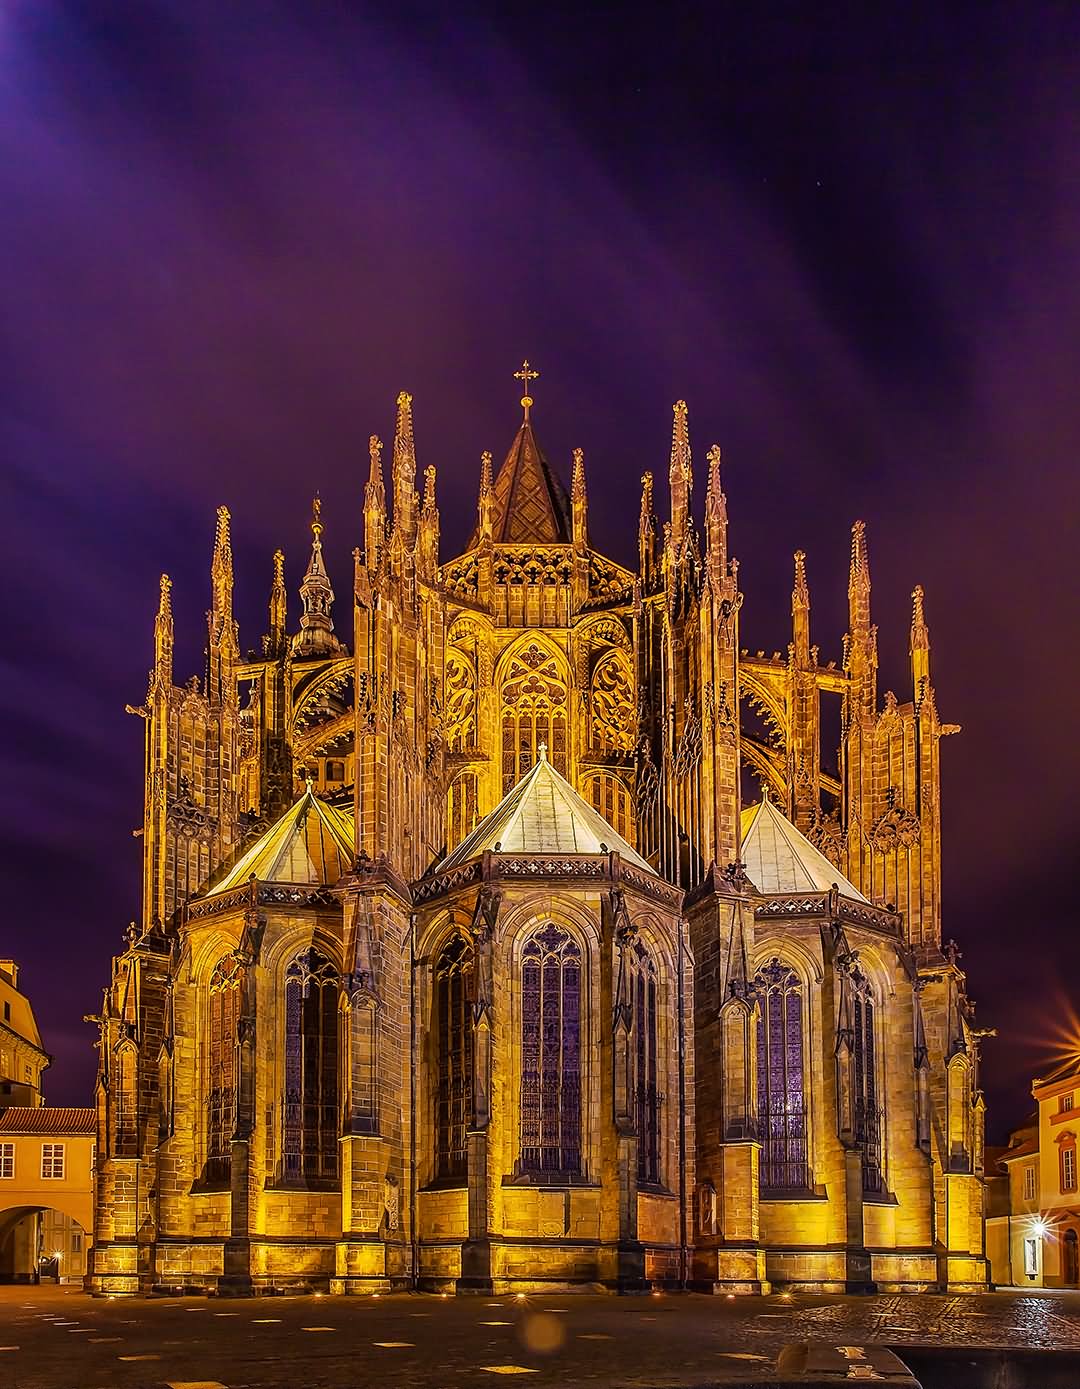 20 Incredible Night View Images And Photos of St. Vitus Cathedral, Prague